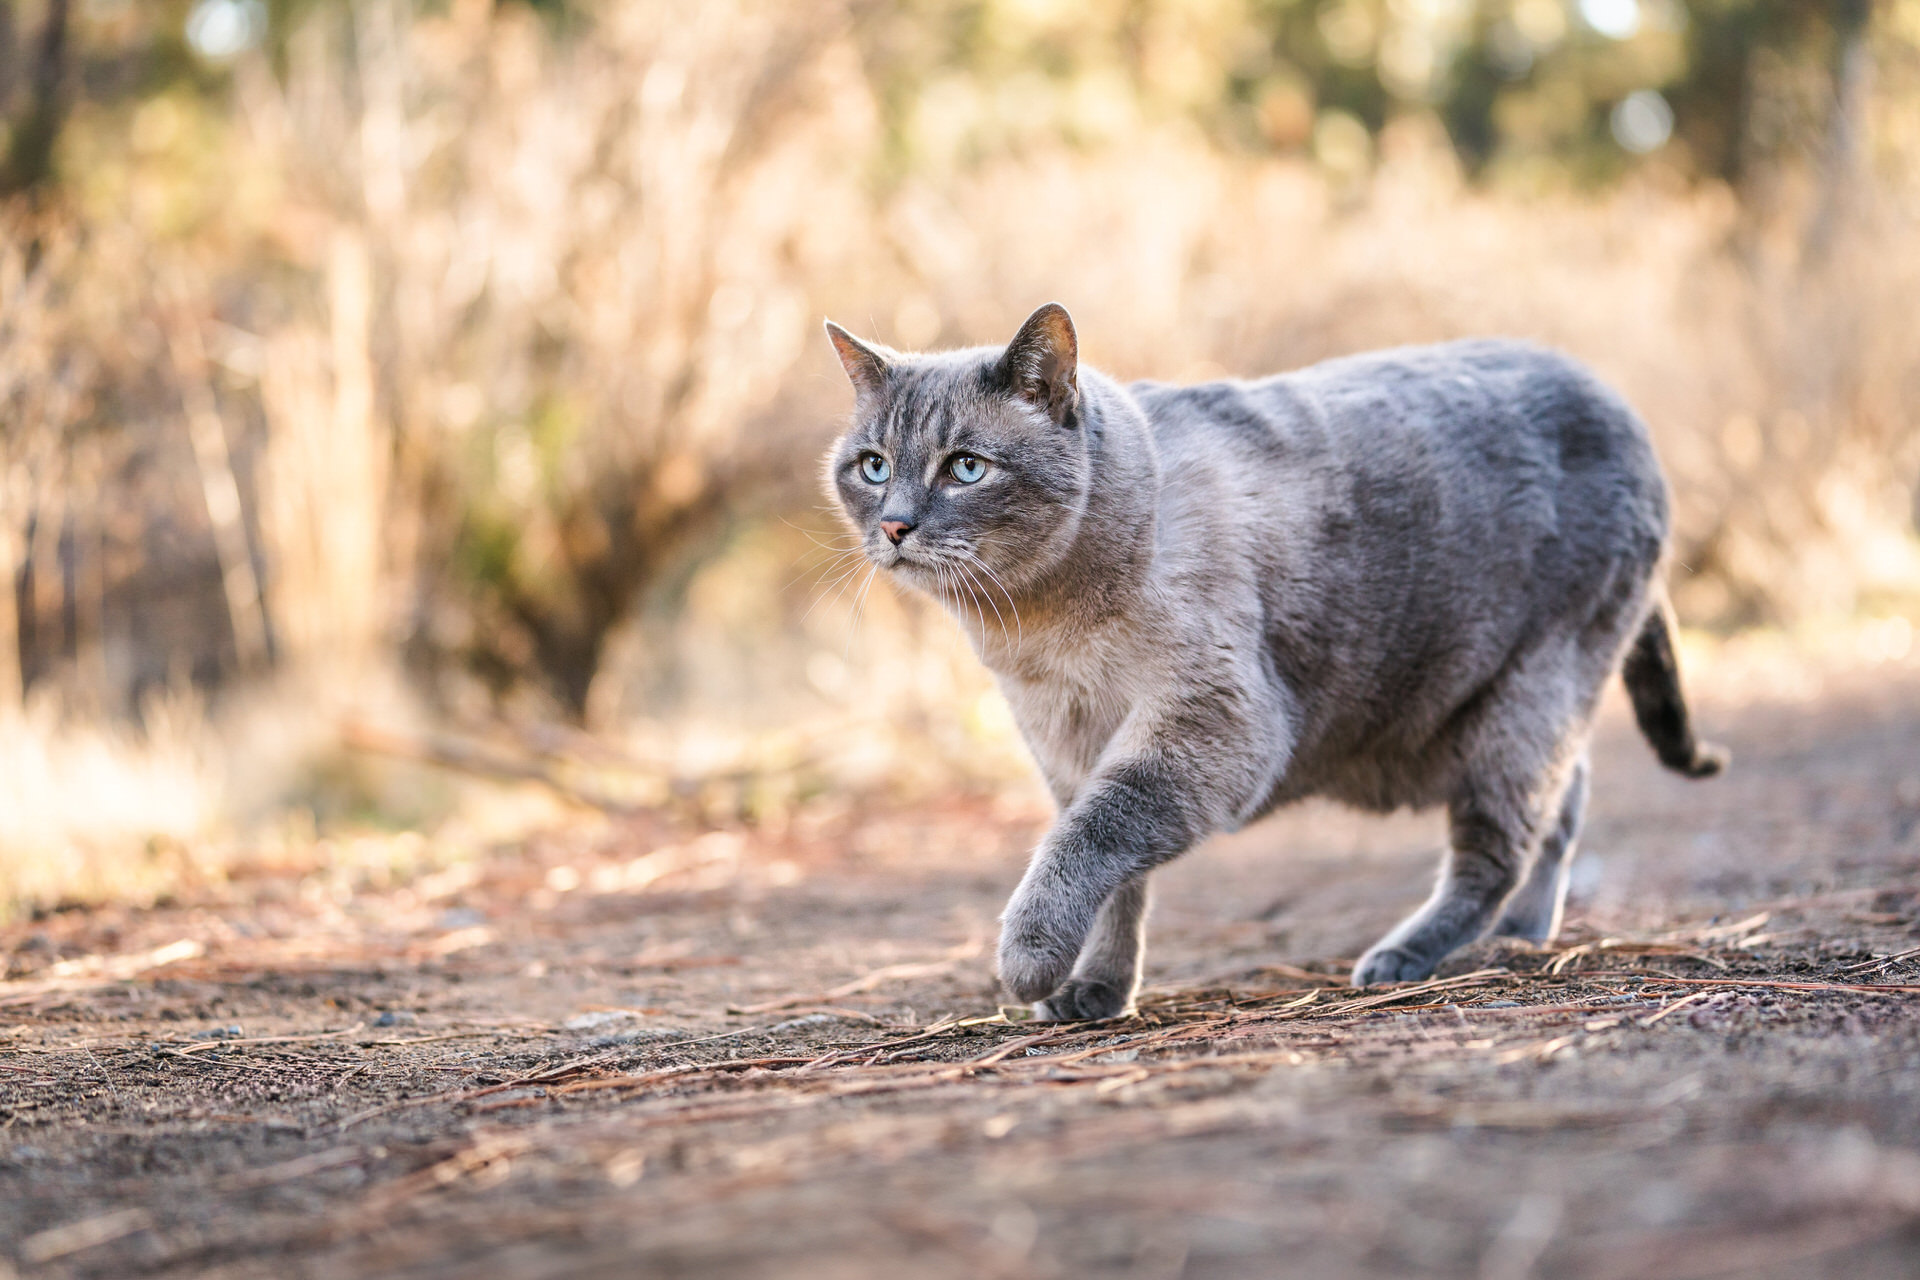 Alert cat prowling outdoor trail